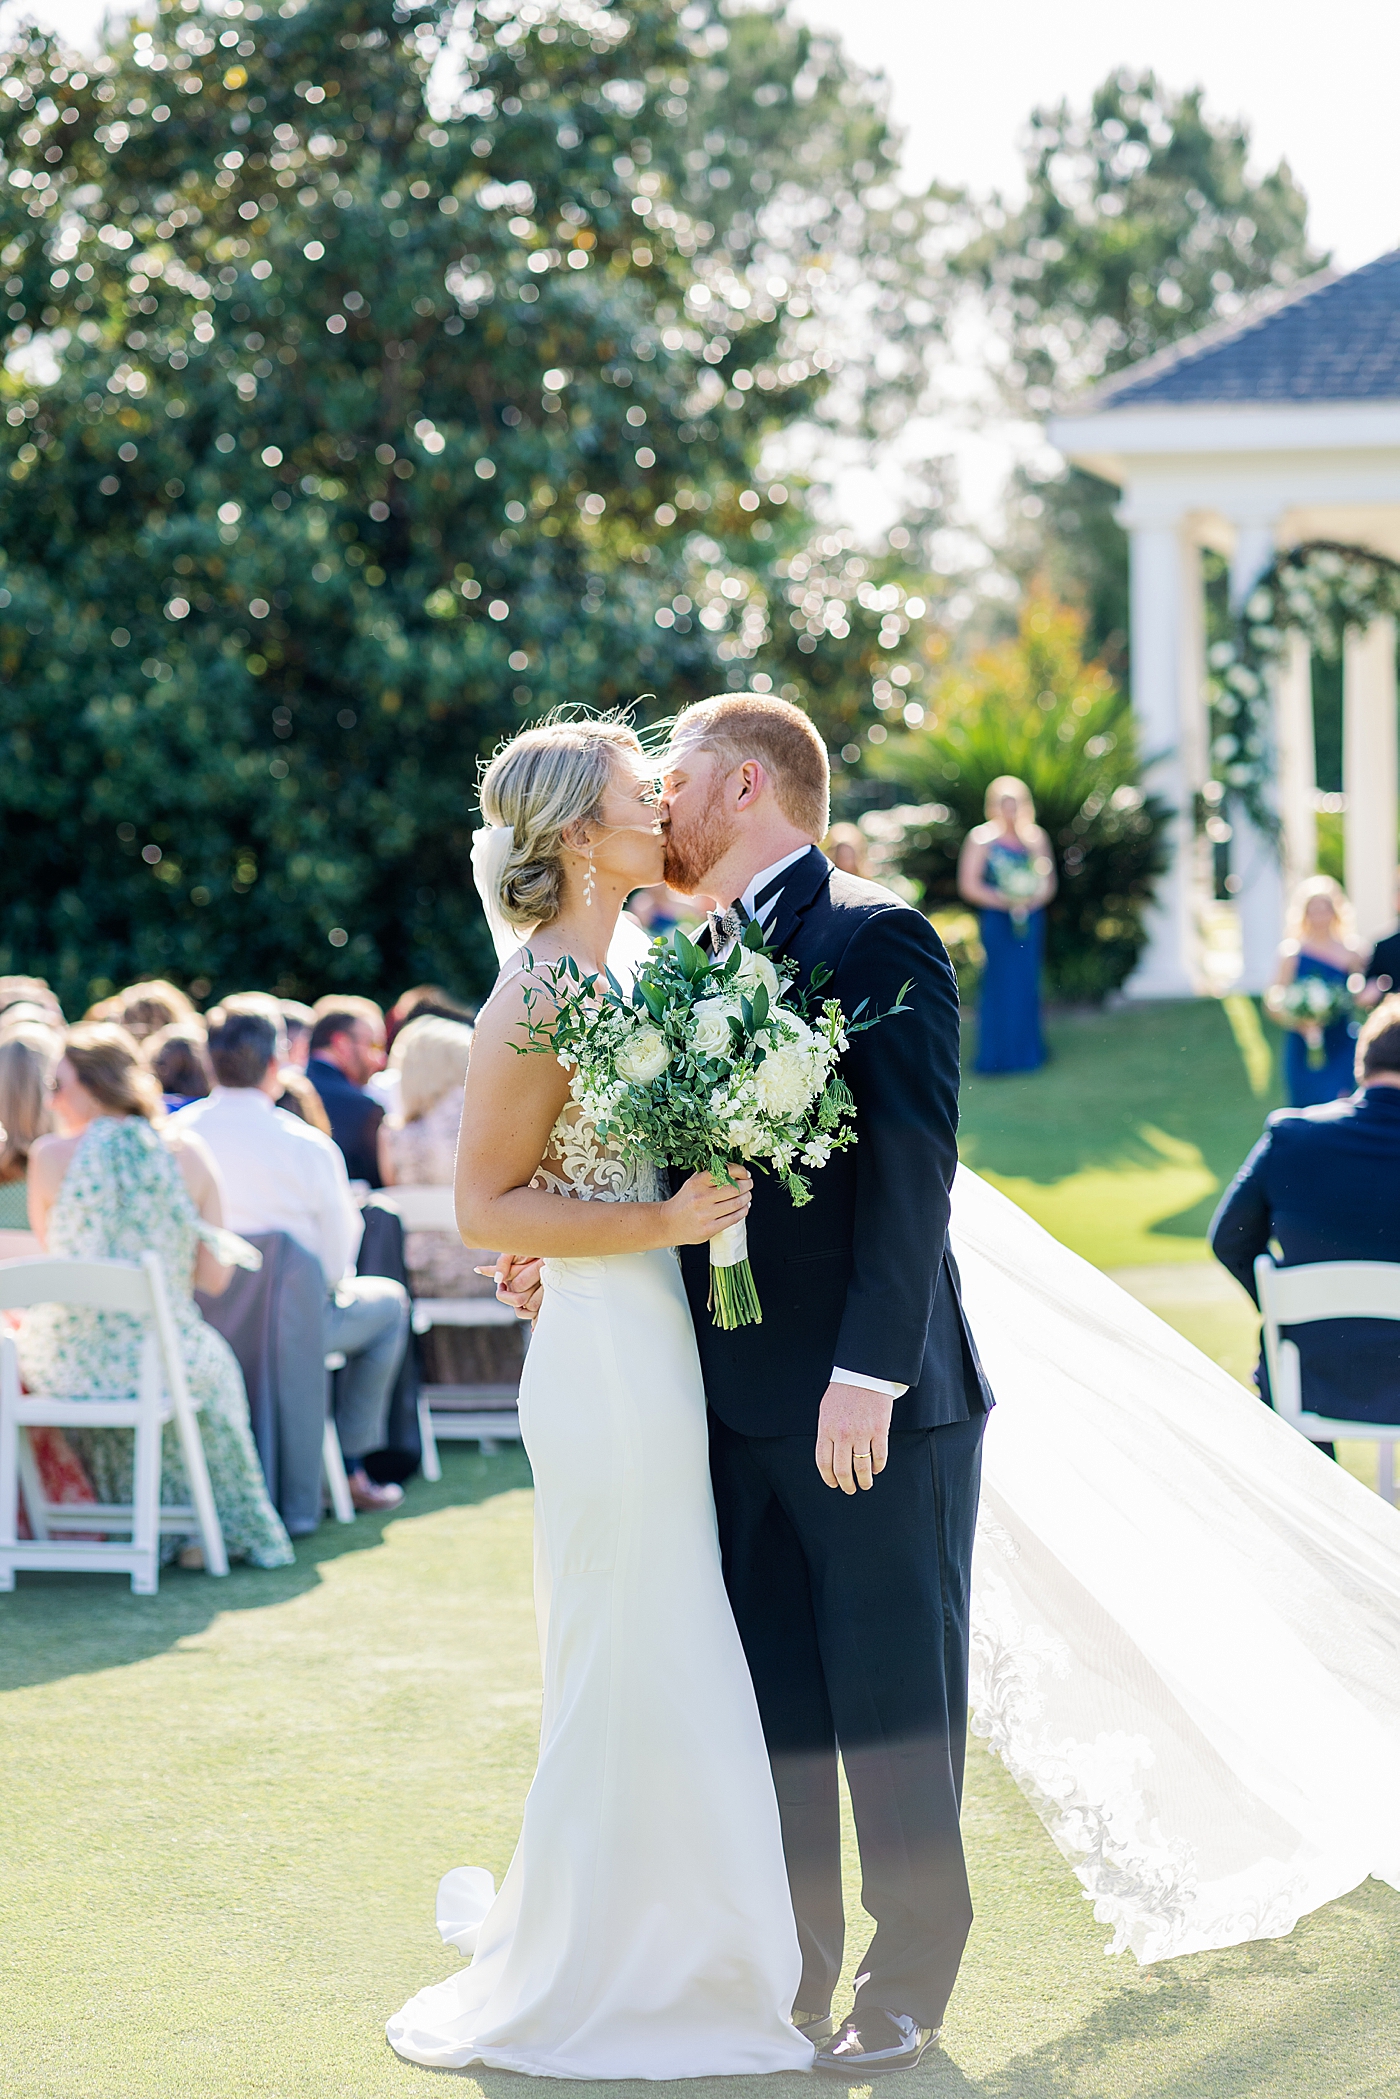 Bride and groom kissing as they walk down the aisle | Image by Annie Laura Photo